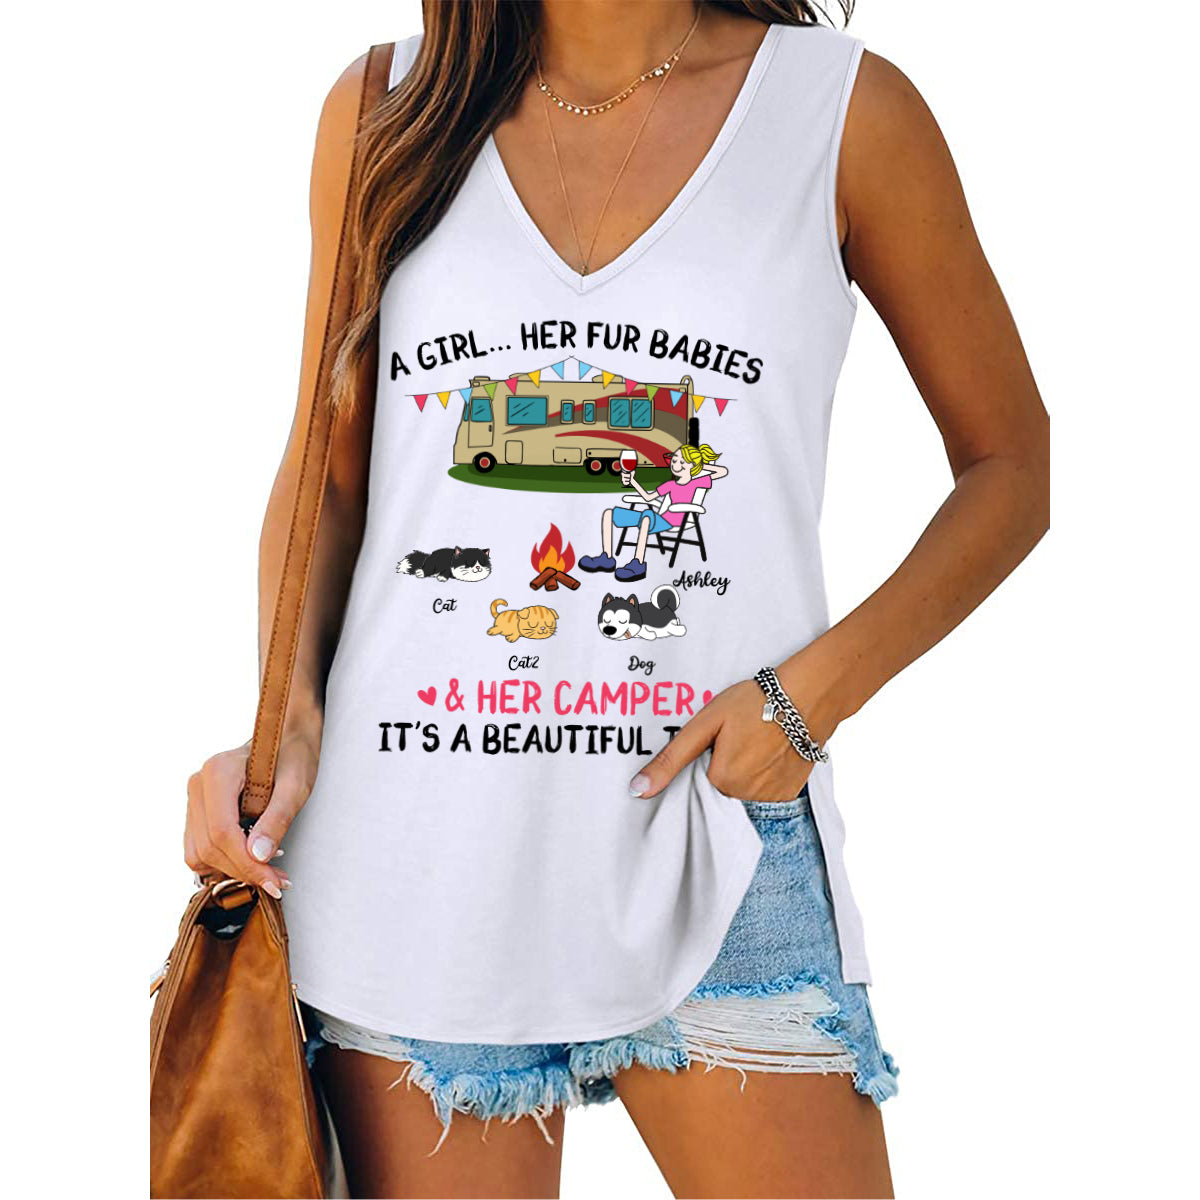 A Camping Girl And Her Fur Babies Personalized Tank Tops V Neck Casual Flowy Sleeveless